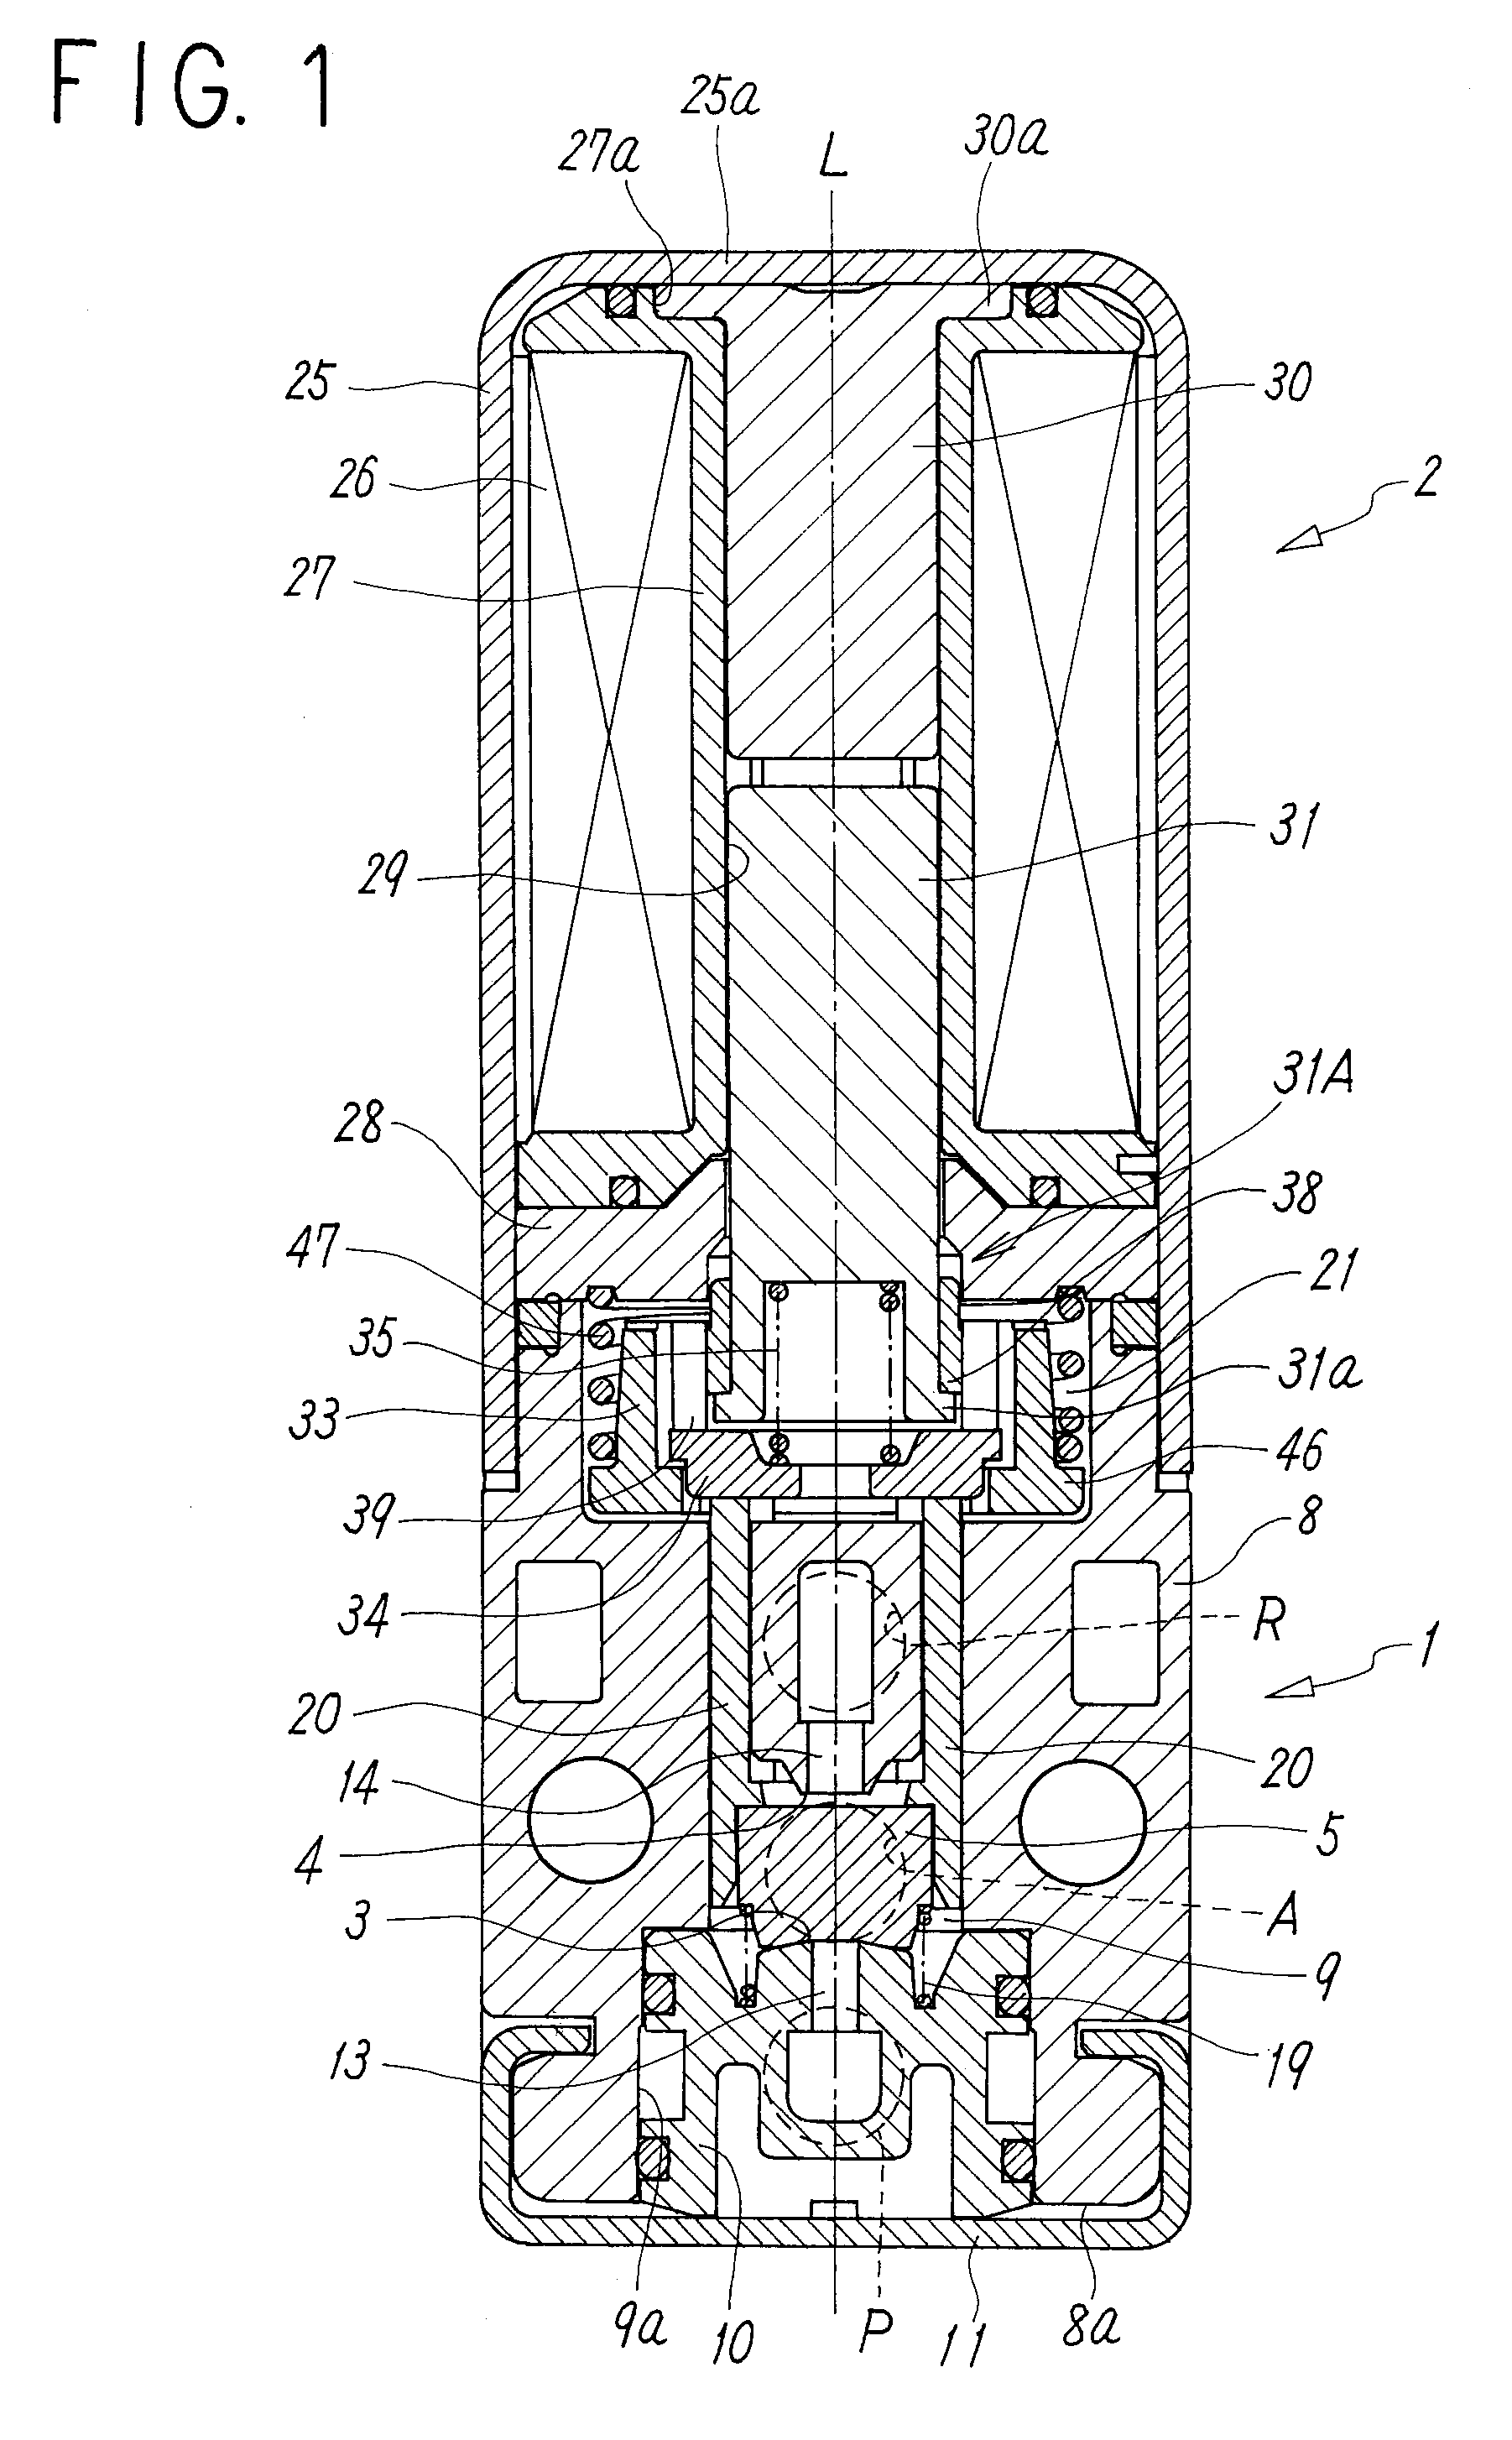 Solenoid valve having a hollow cap mounted on a leading end of a movable iron core